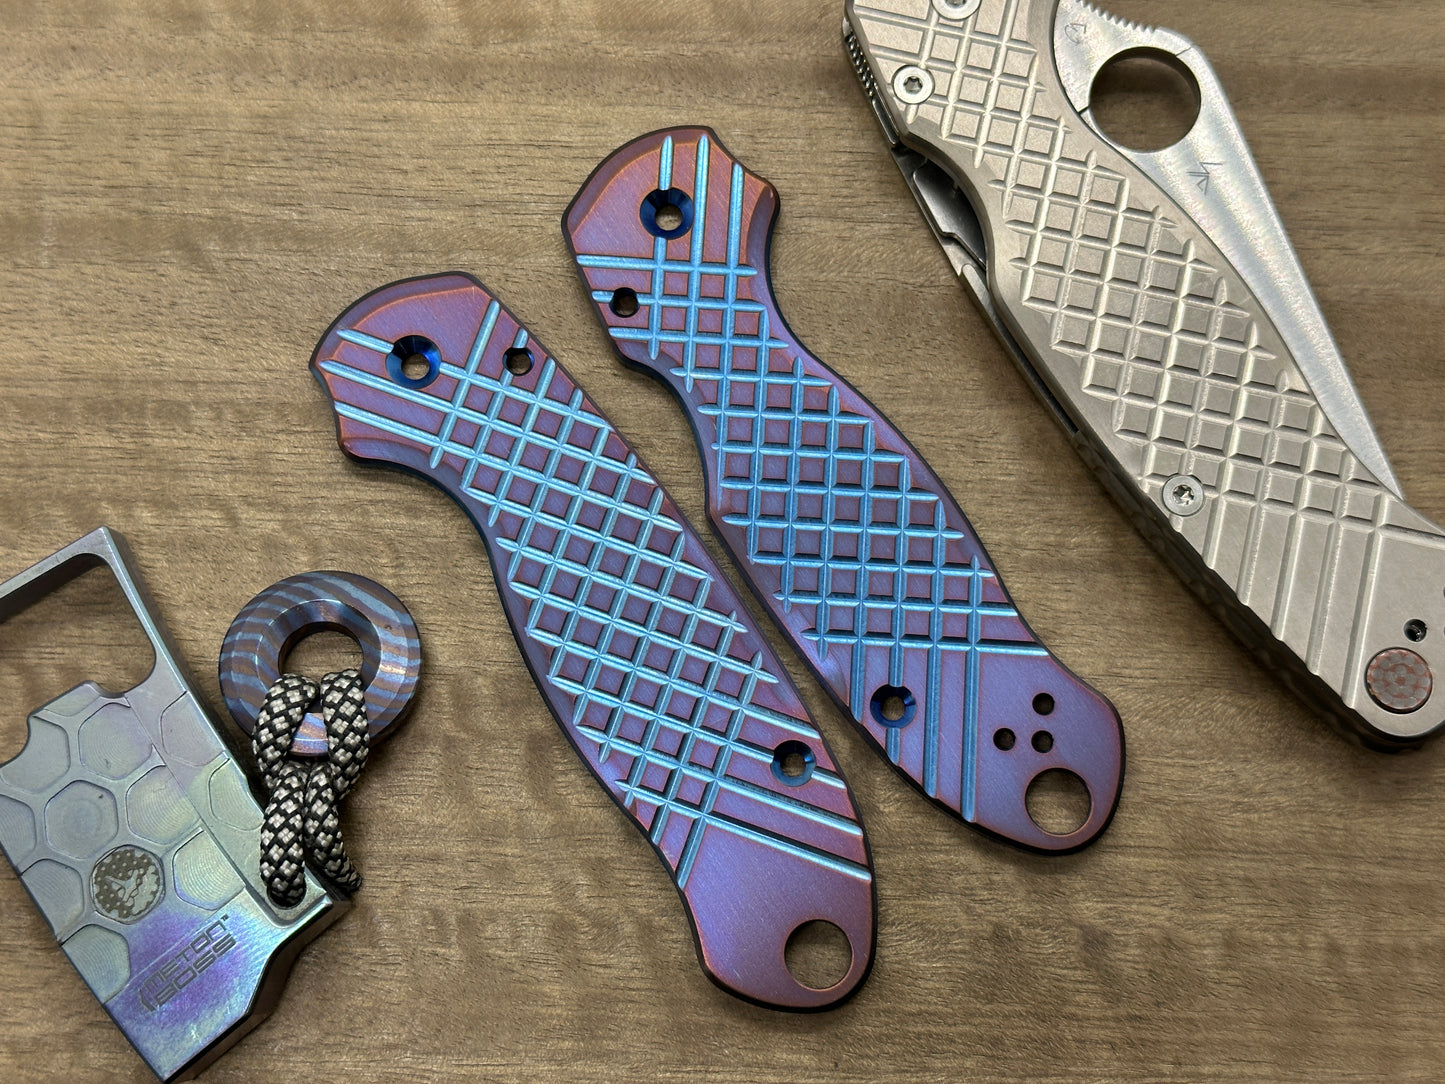 Redesigned 2-Tone (Blue-Purple) FRAG milled Titanium scales for Spyderco Para 3